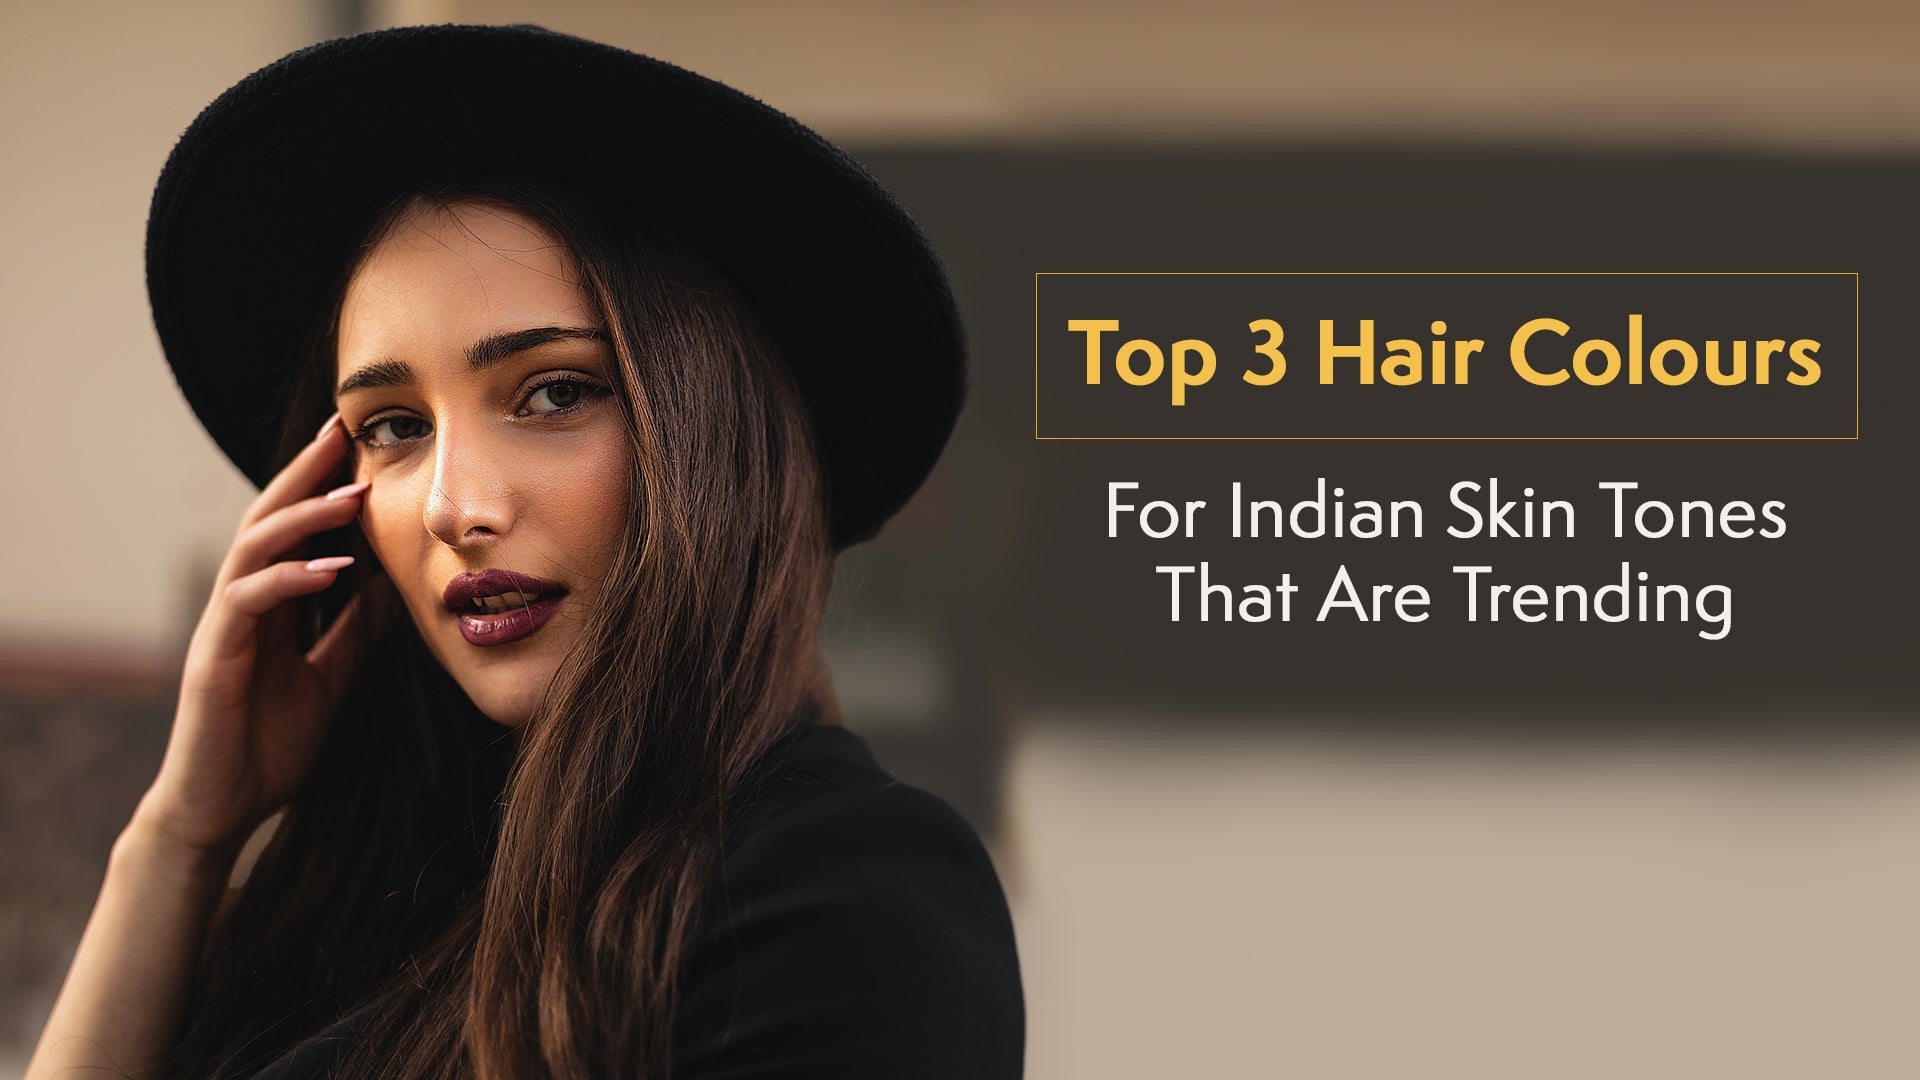 Trend Alert: Top 3 Hair Colours For Indian Skin Tones That Are Trending